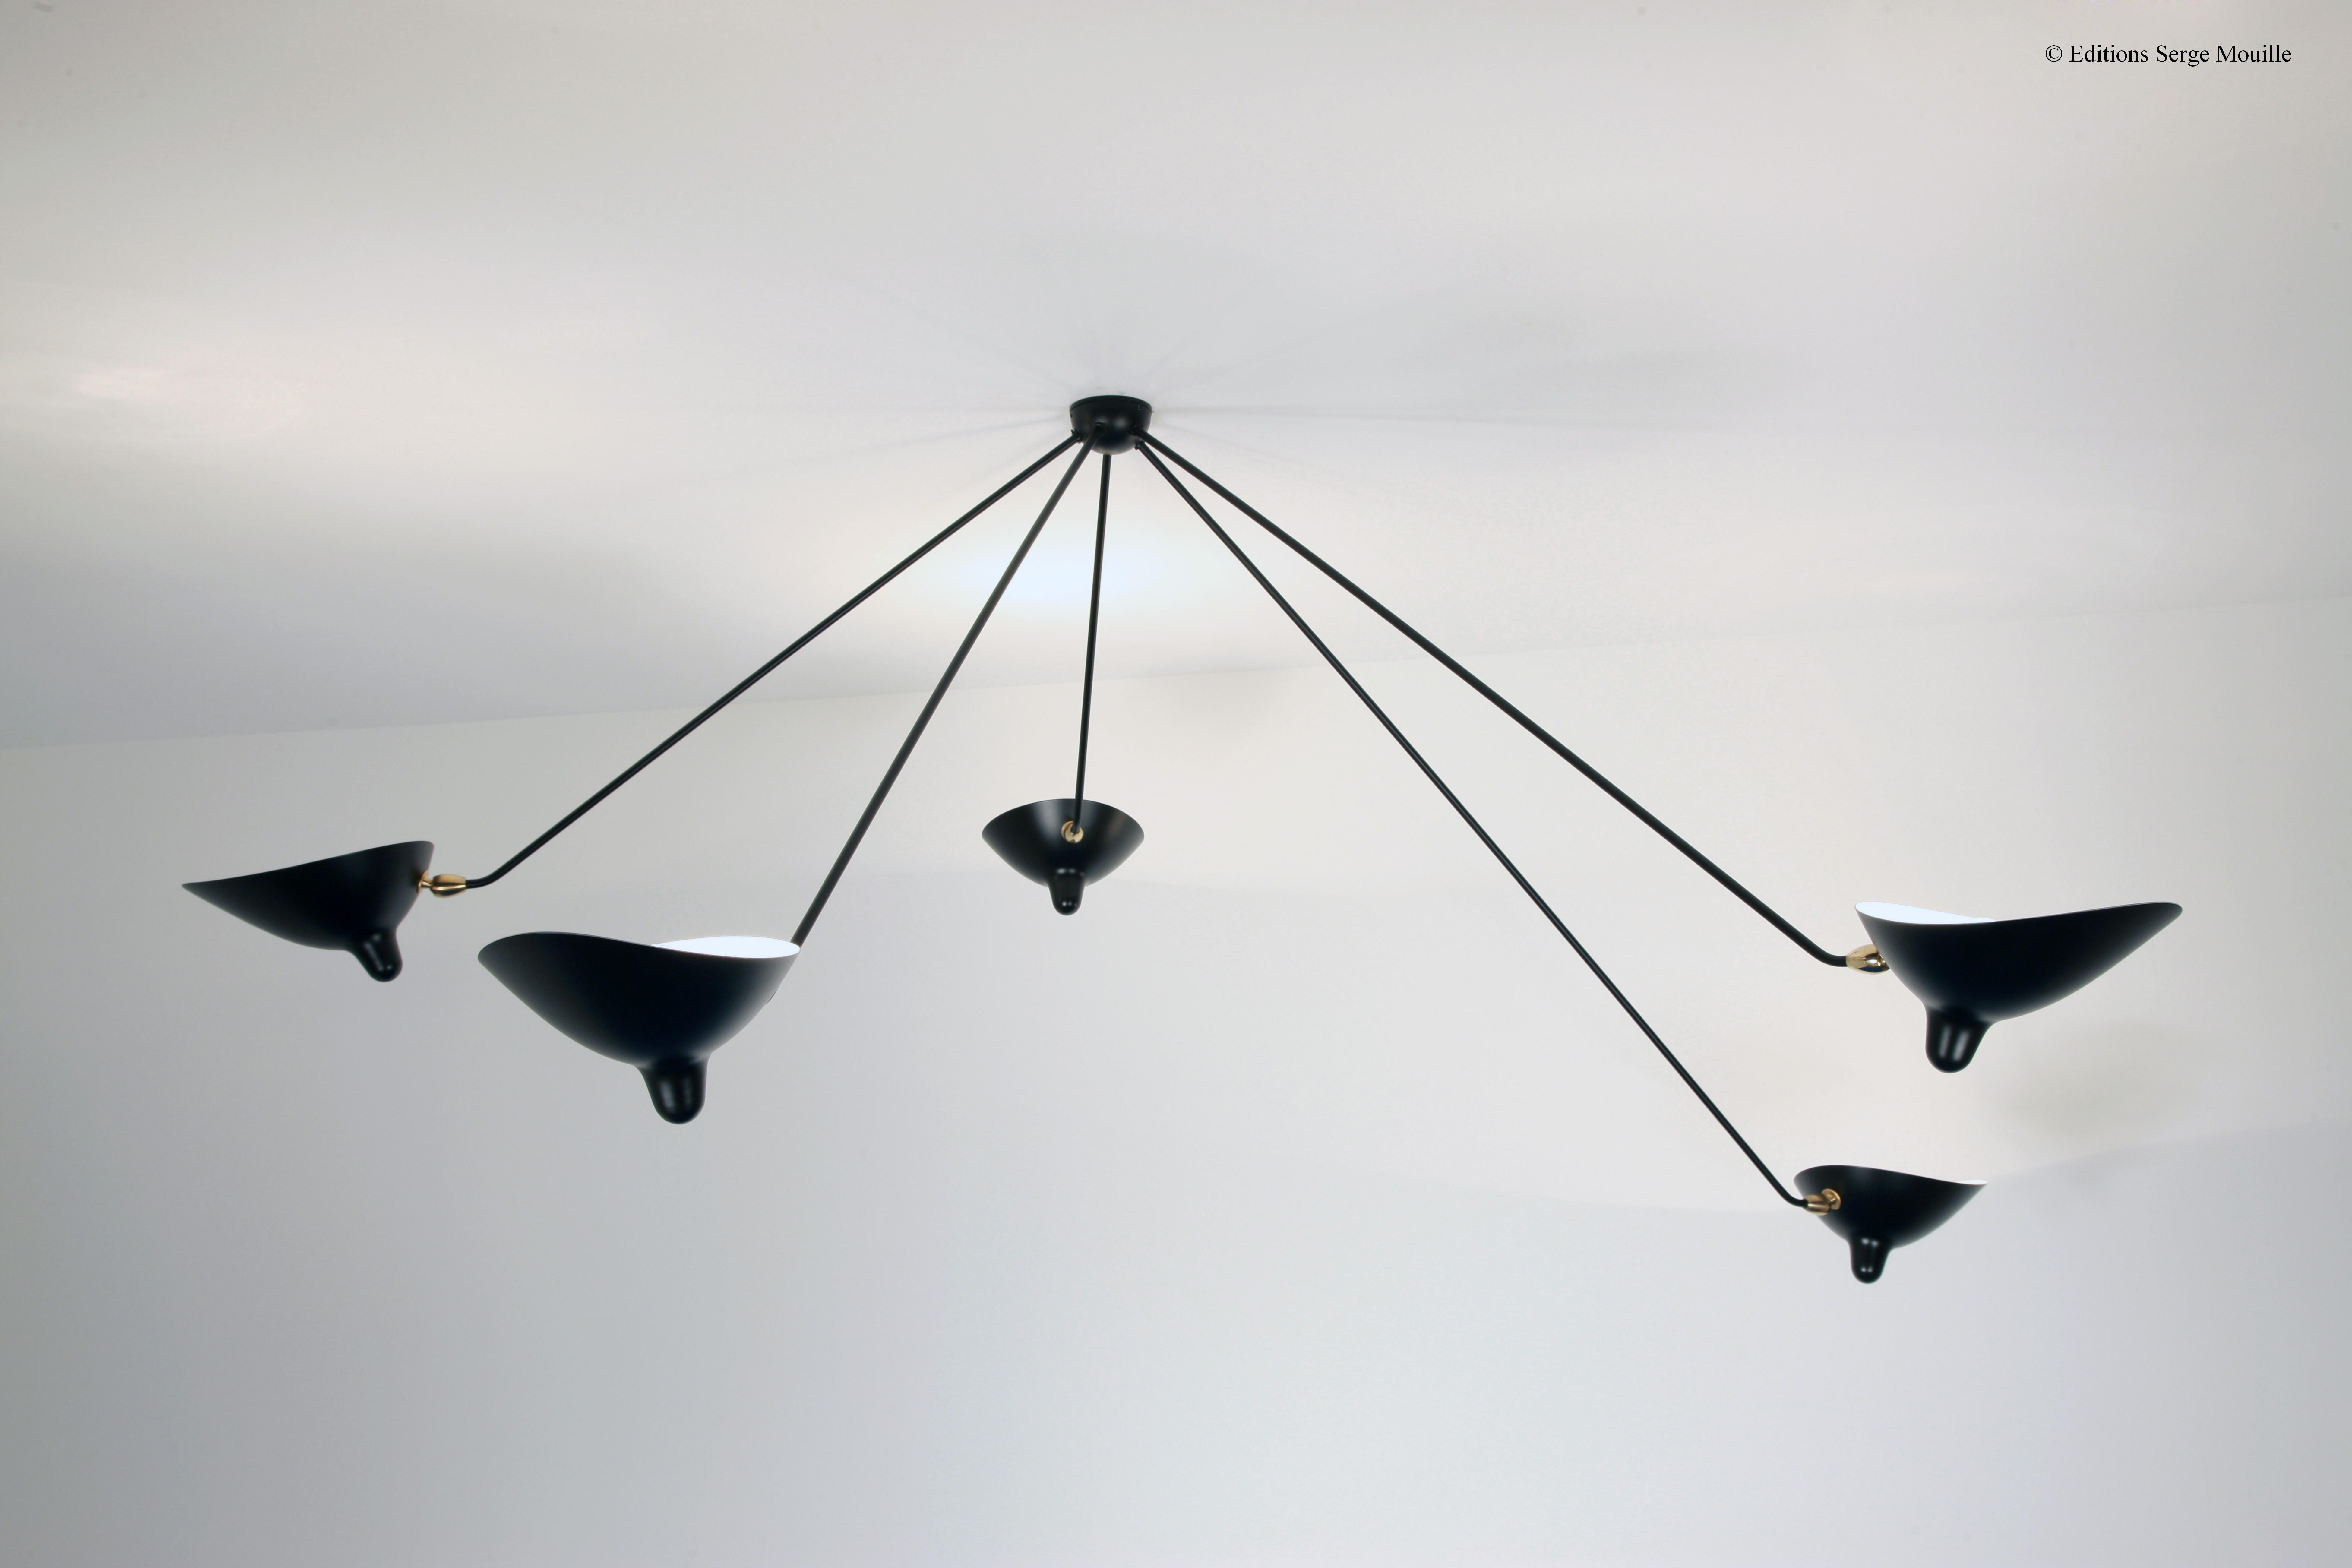 Large Serge Mouille 'Plafonnier Araignée 5 Bras Fixes' ceiling lamp in black.

Originally designed in 1955, this iconic chandelier is still made by Edition Serge Mouille in France using many of the same small-scale manufacturing techniques and